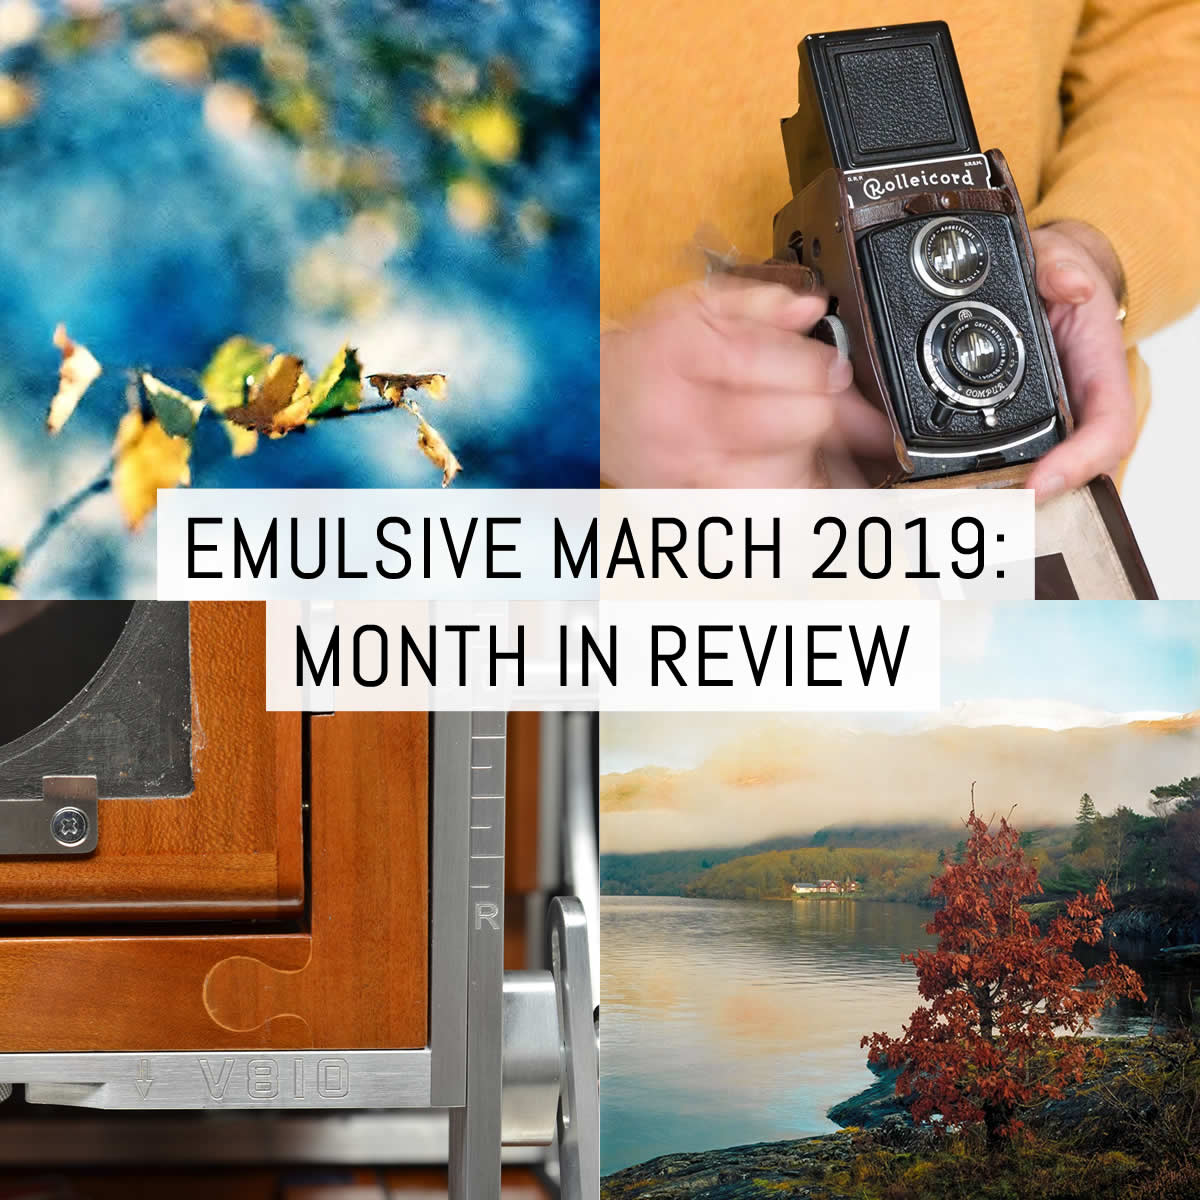 Cover - Month in review - 2019 March